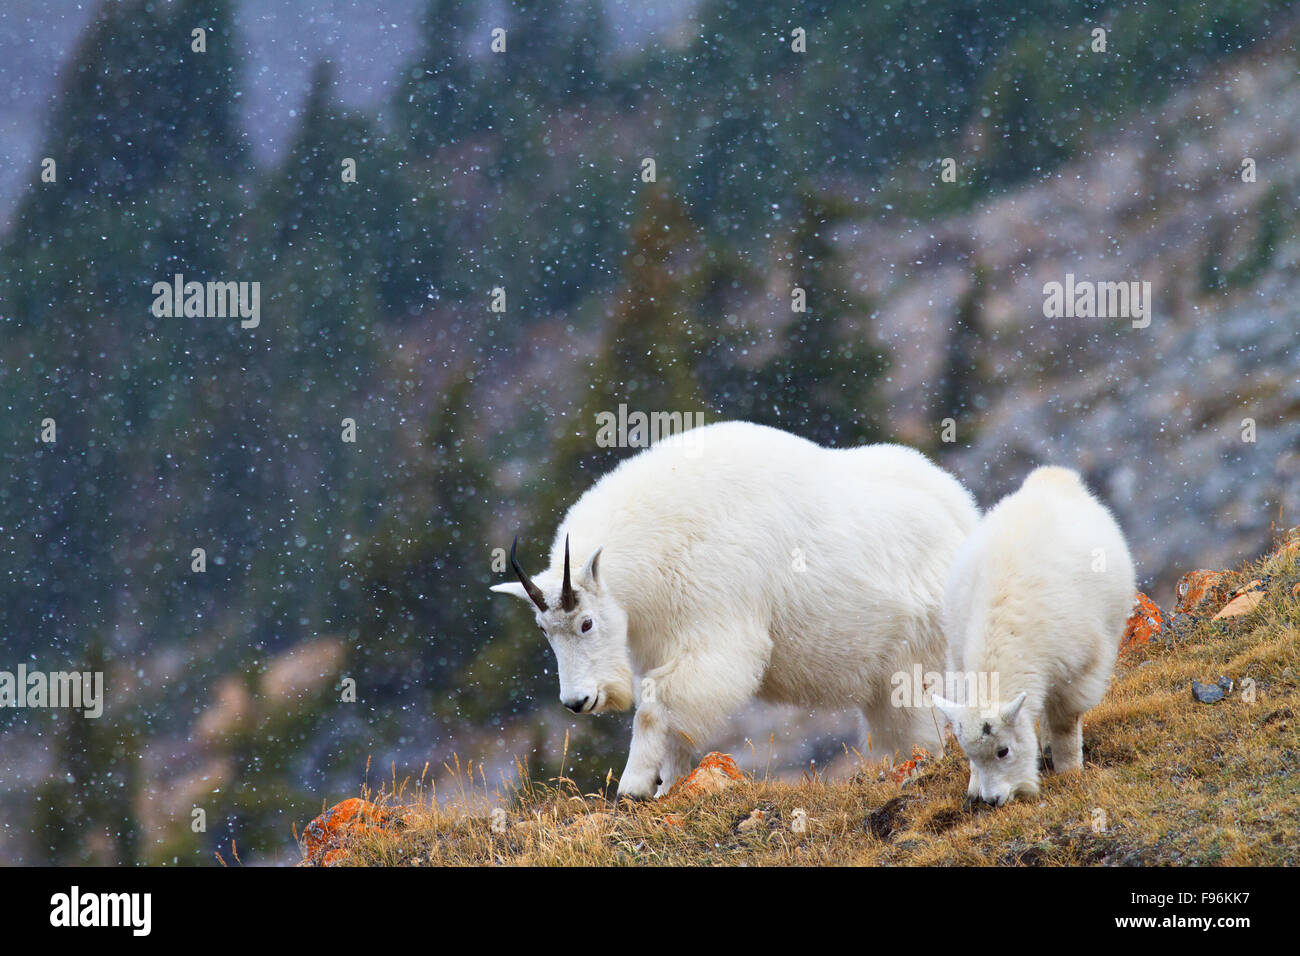 Mountain goats (Oreamnos americanus), nanny and kid, foraging on a mountain slope in a snowfall, Canadian Rockies Stock Photo